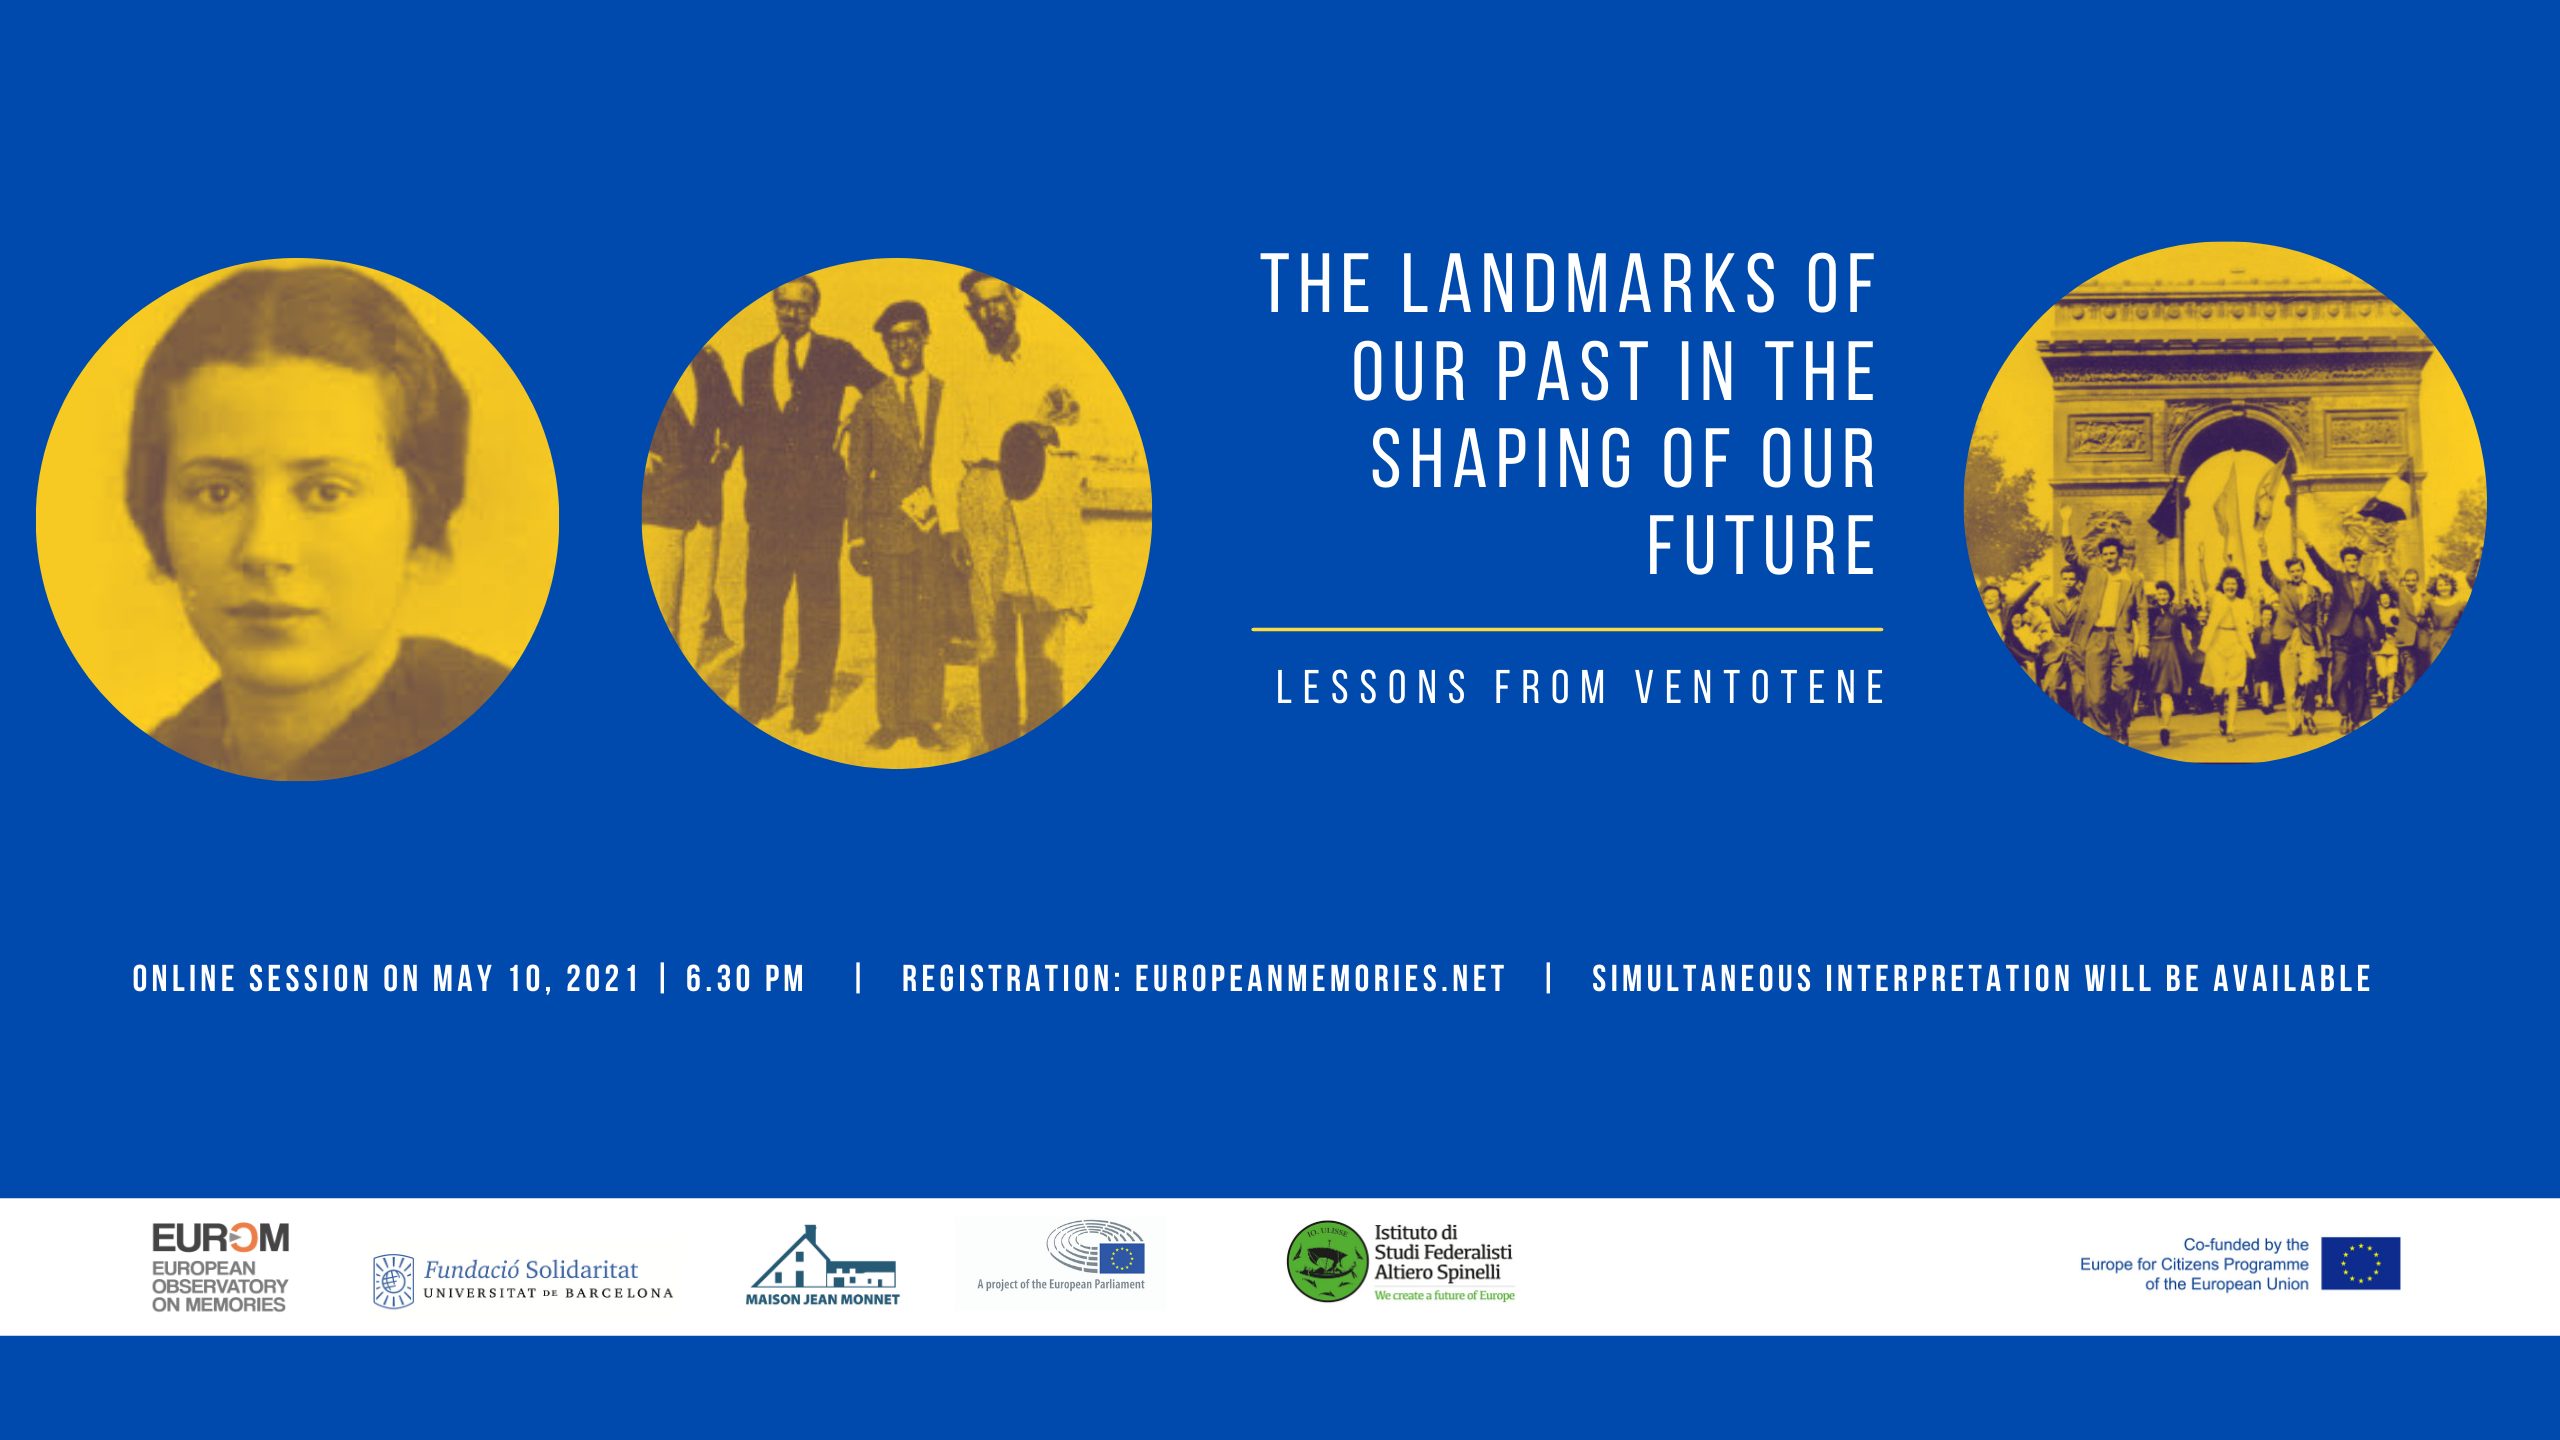 The landmarks of our past in the shaping of our future. Lessons from Ventotene